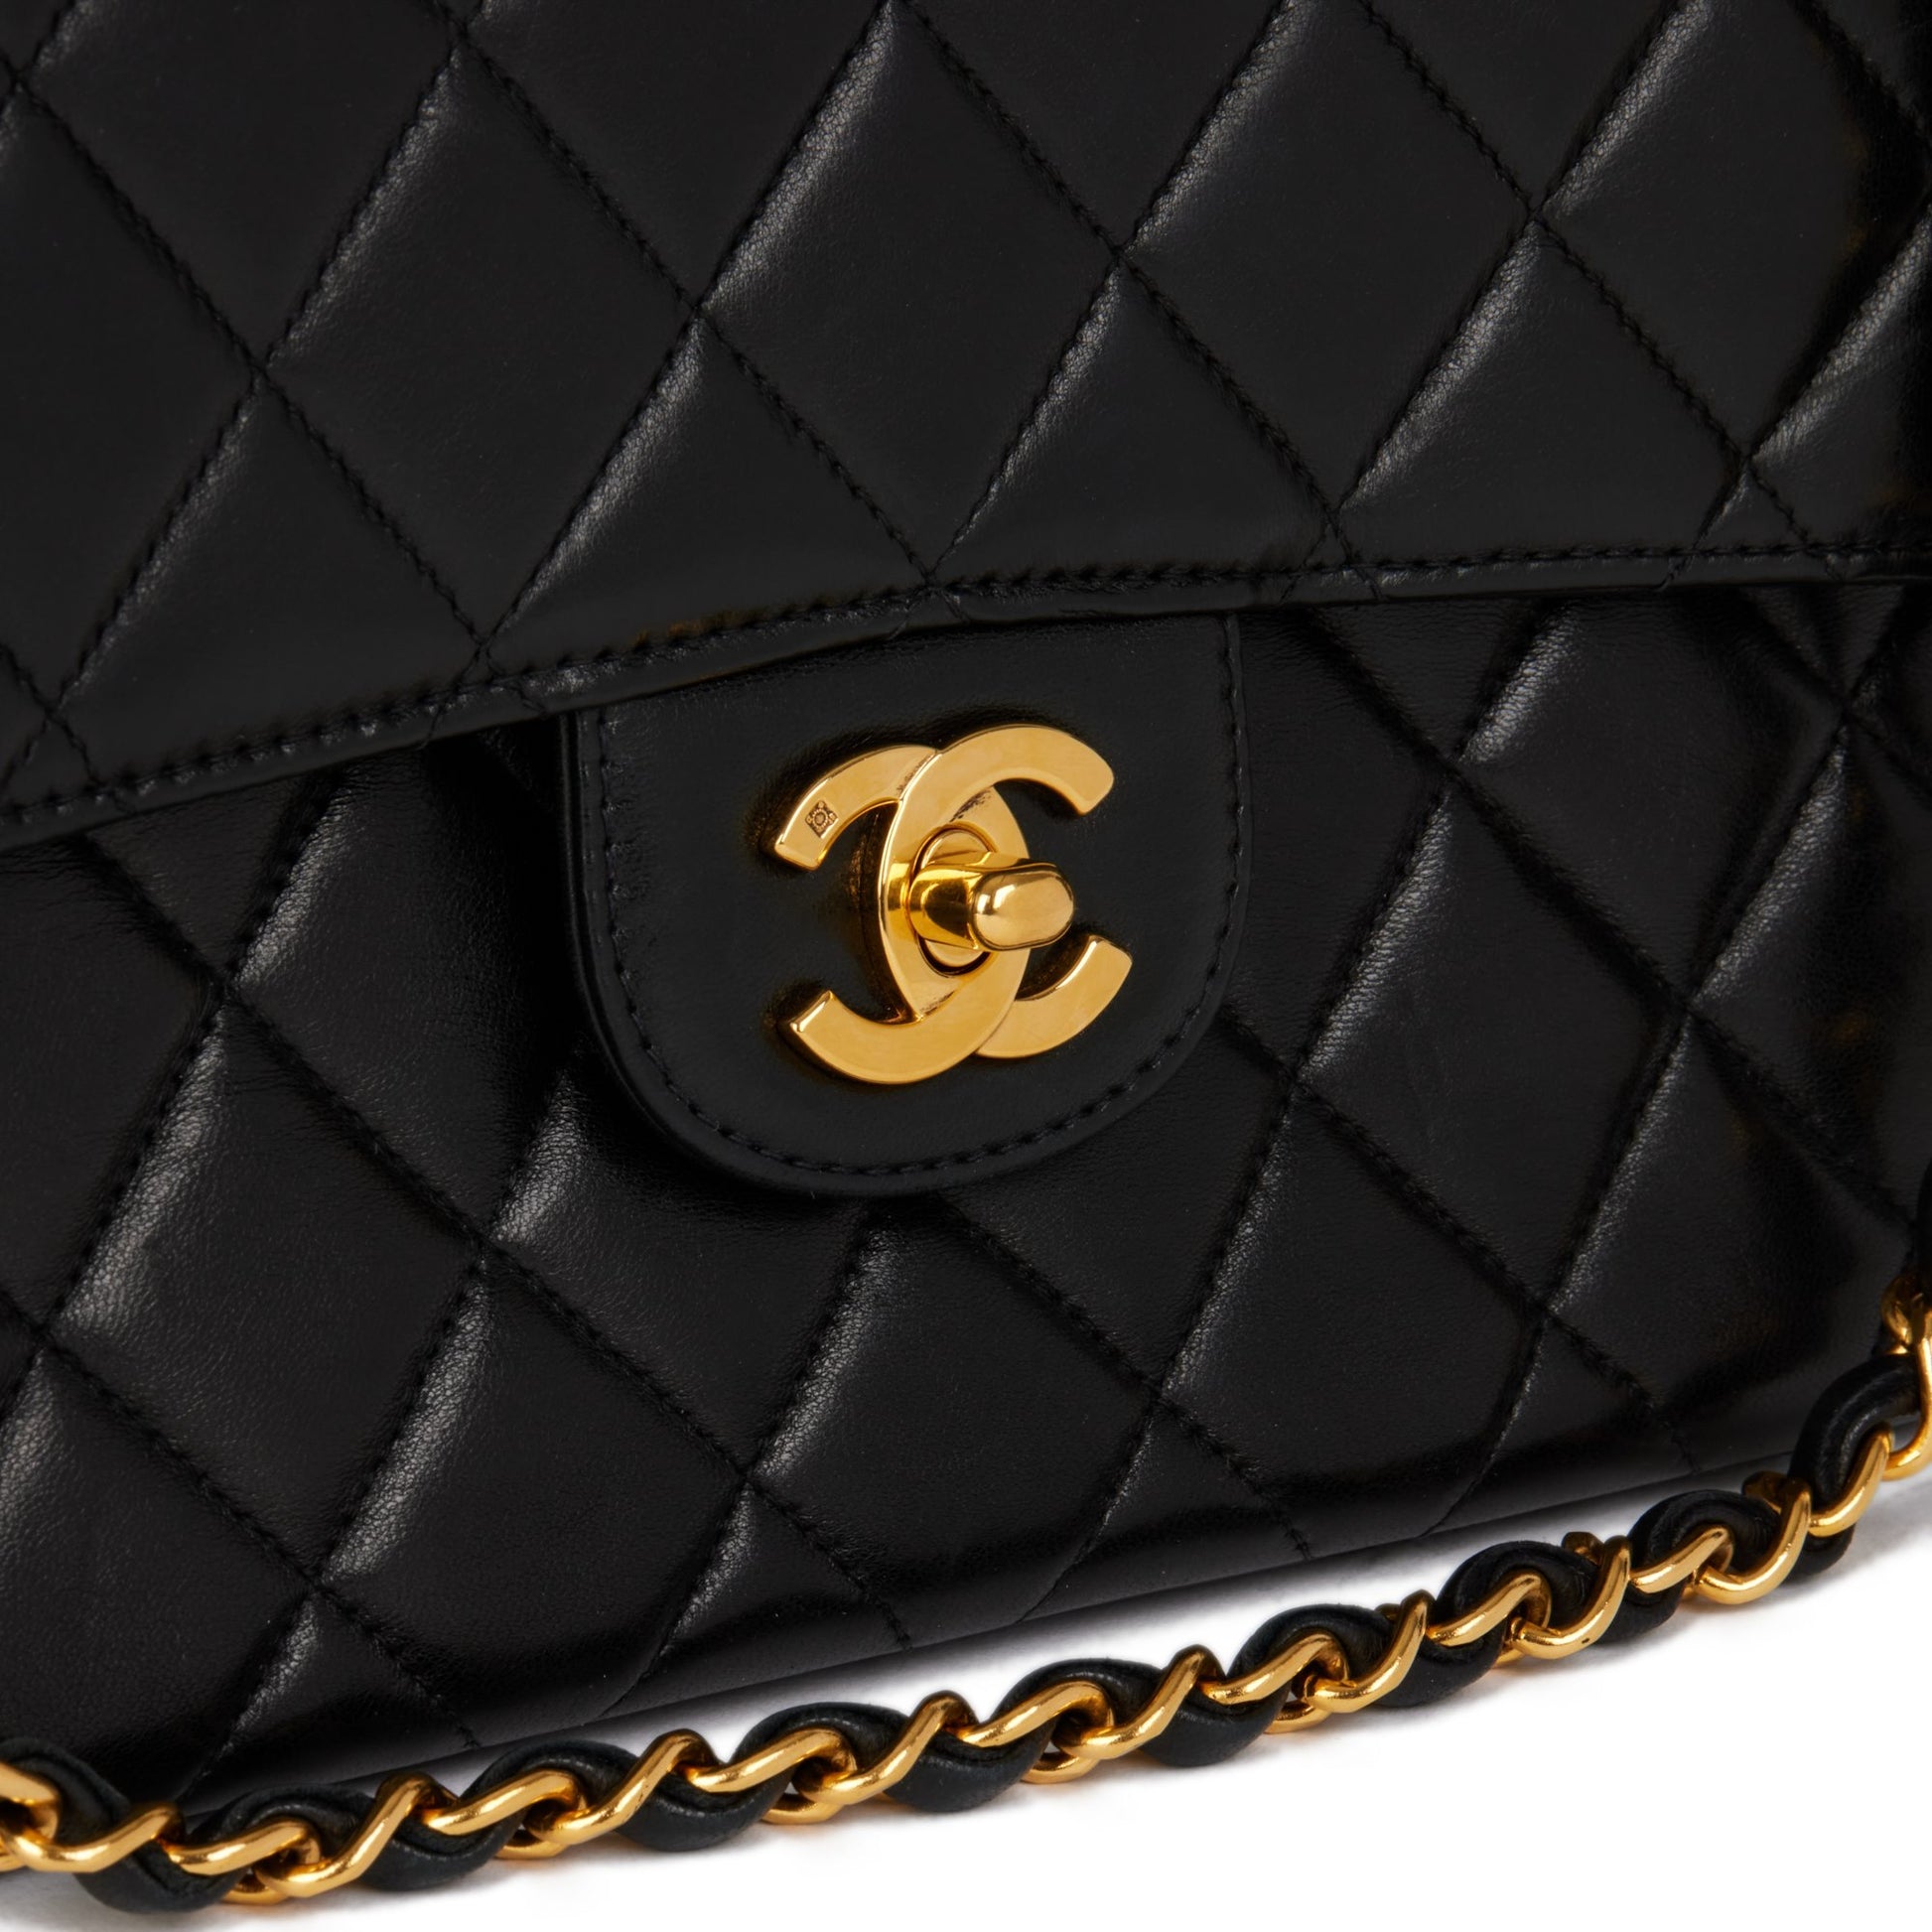 Chanel Black Quilted Lambskin Vintage Medium Double Sided Classic Flap